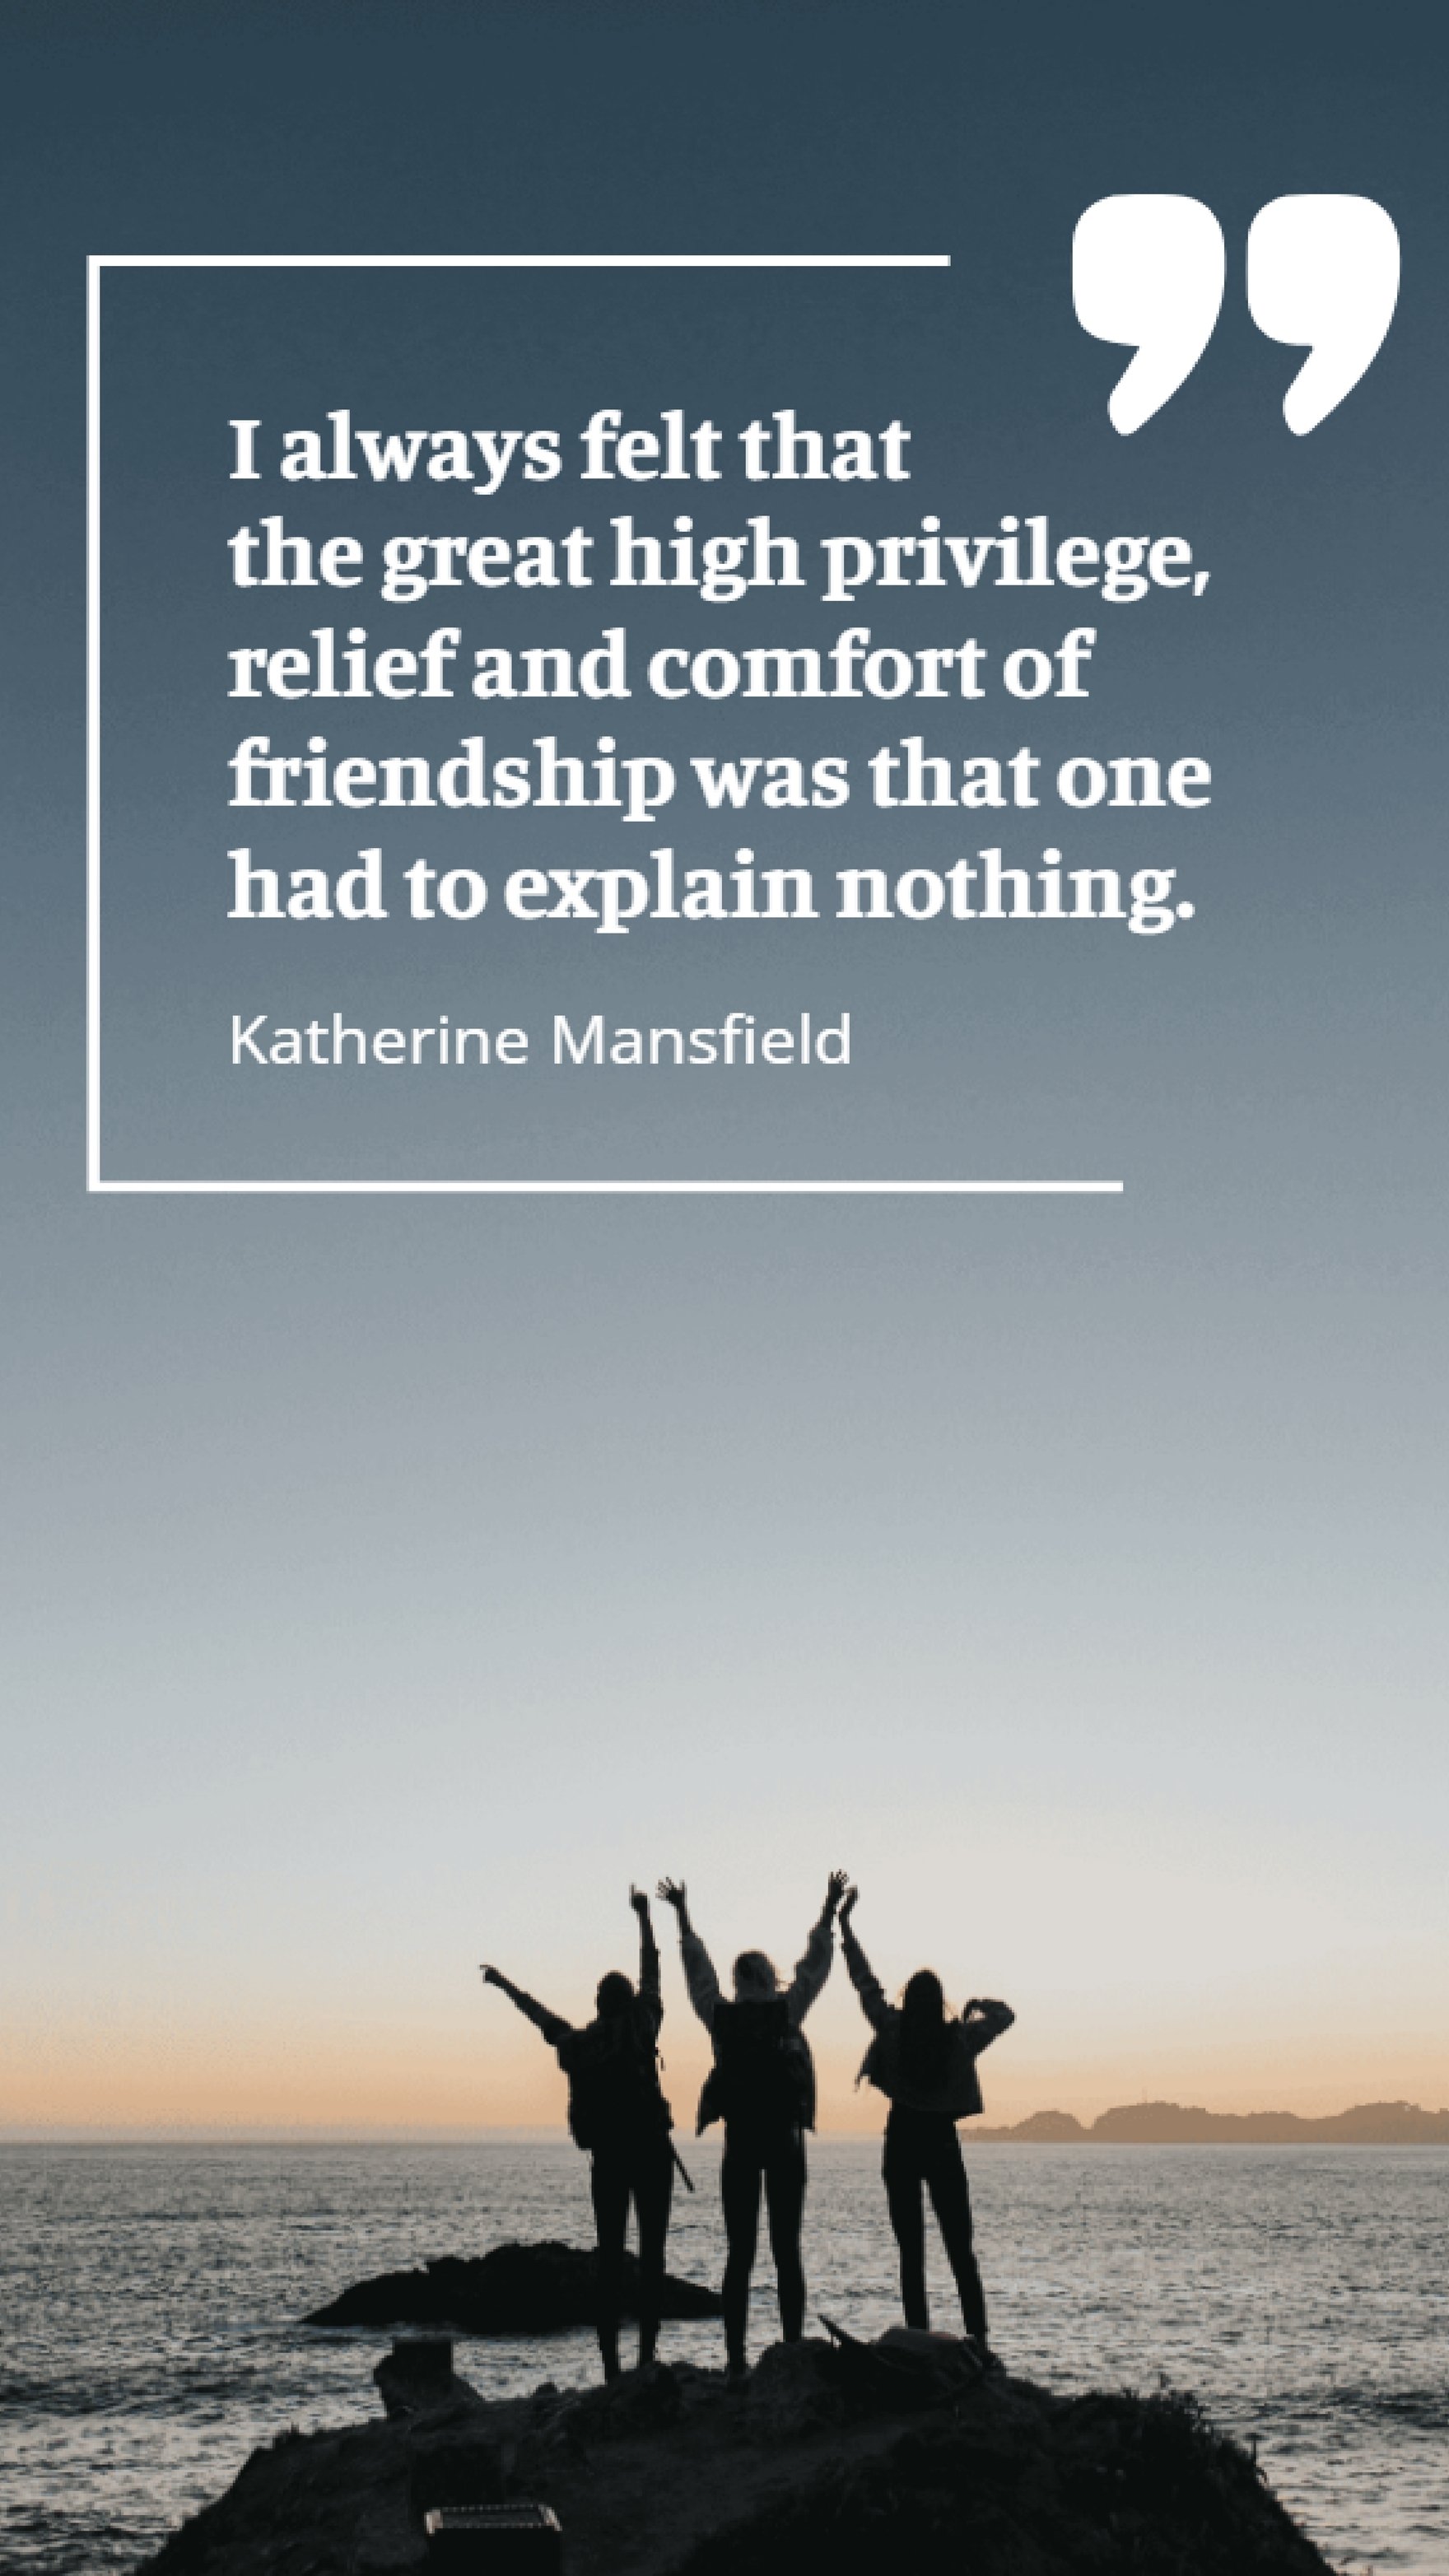 Katherine Mansfield - I always felt that the great high privilege, relief and comfort of friendship was that one had to explain nothing. Template